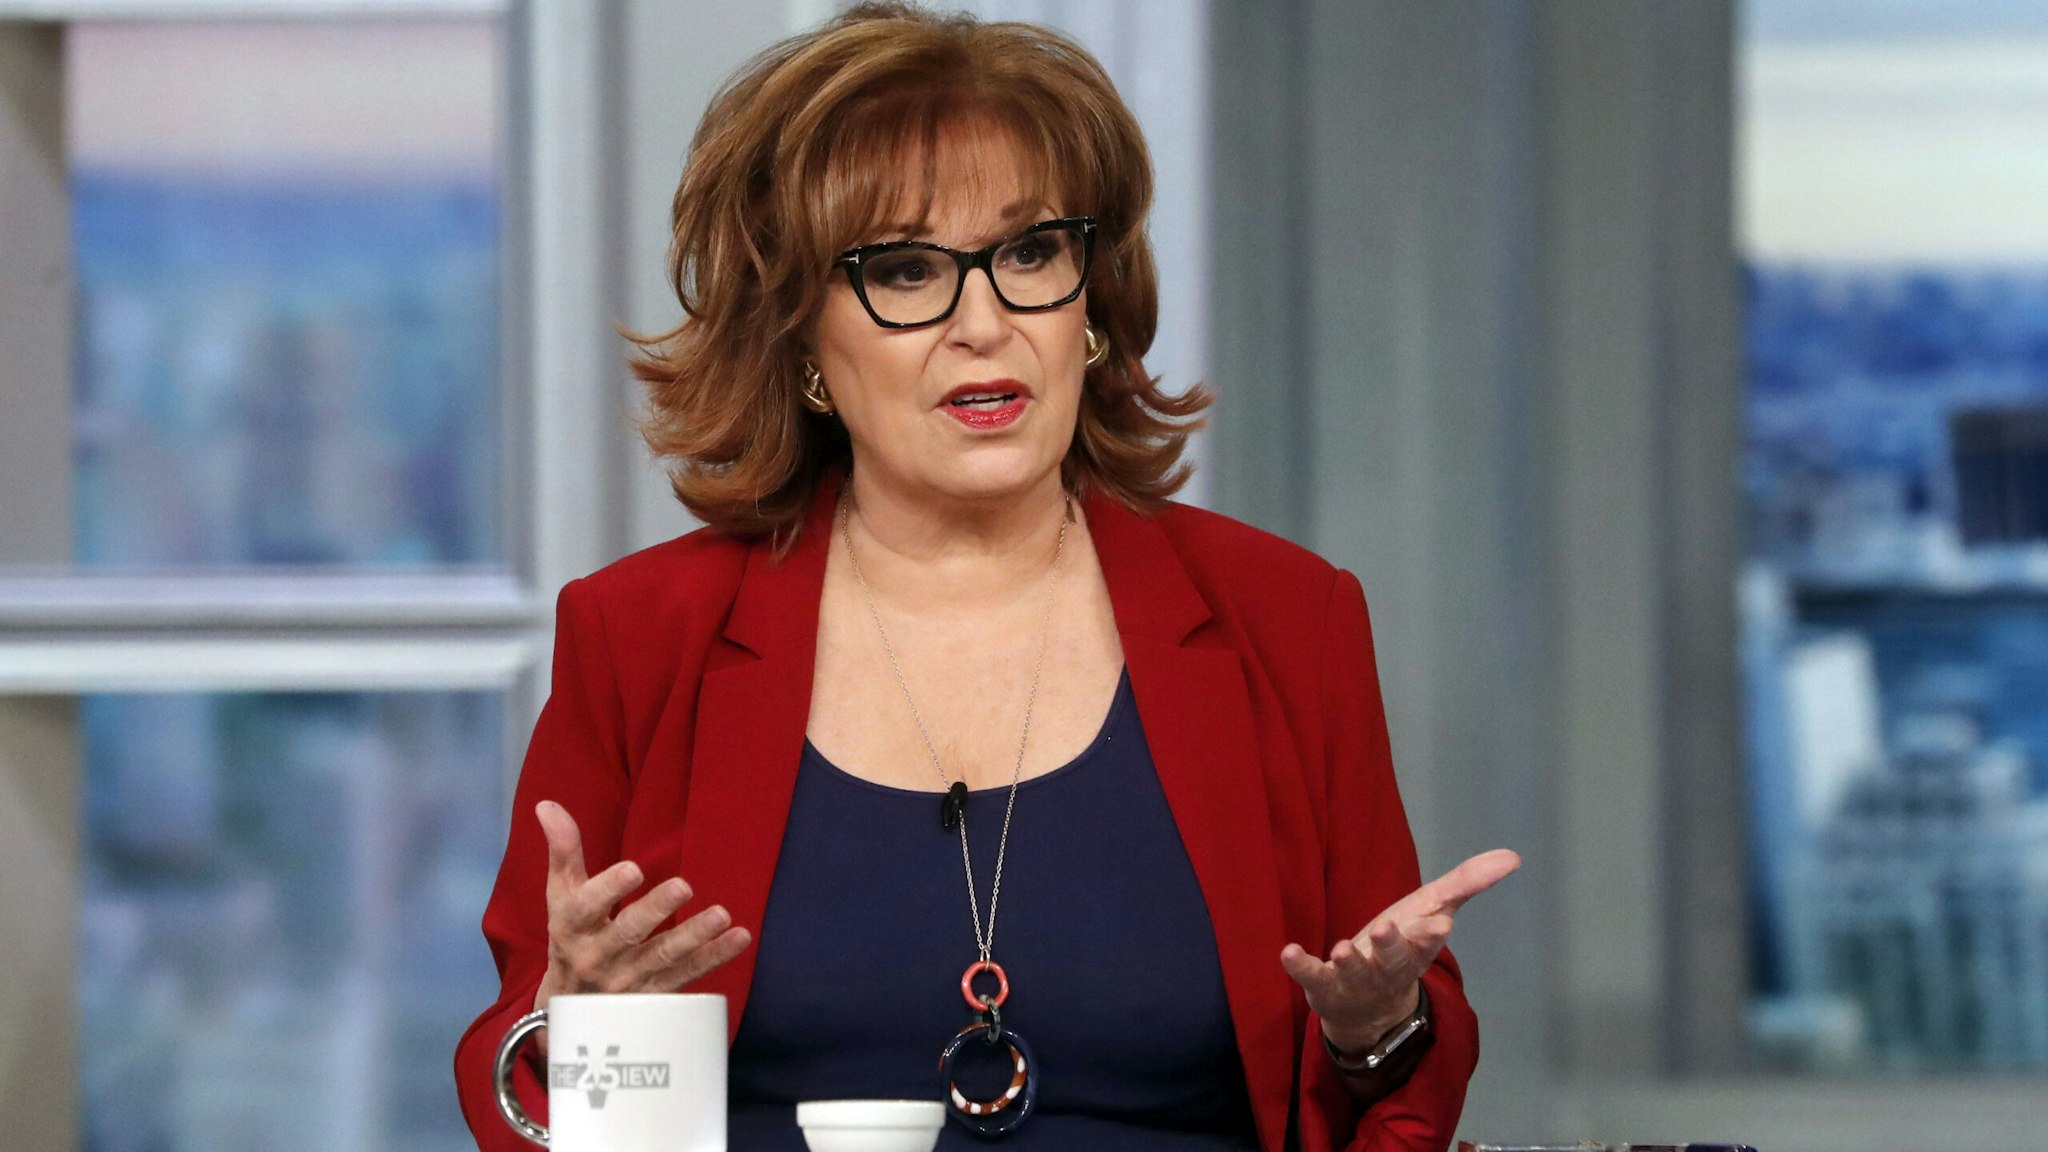 THE VIEW - 5/6/22 - Lindsay Granger is co-host and Senator Elizabeth Warren is a guest on The View on Friday, May 6, 2022. The View airs Monday-Friday, 11am-12pm ET on ABC.